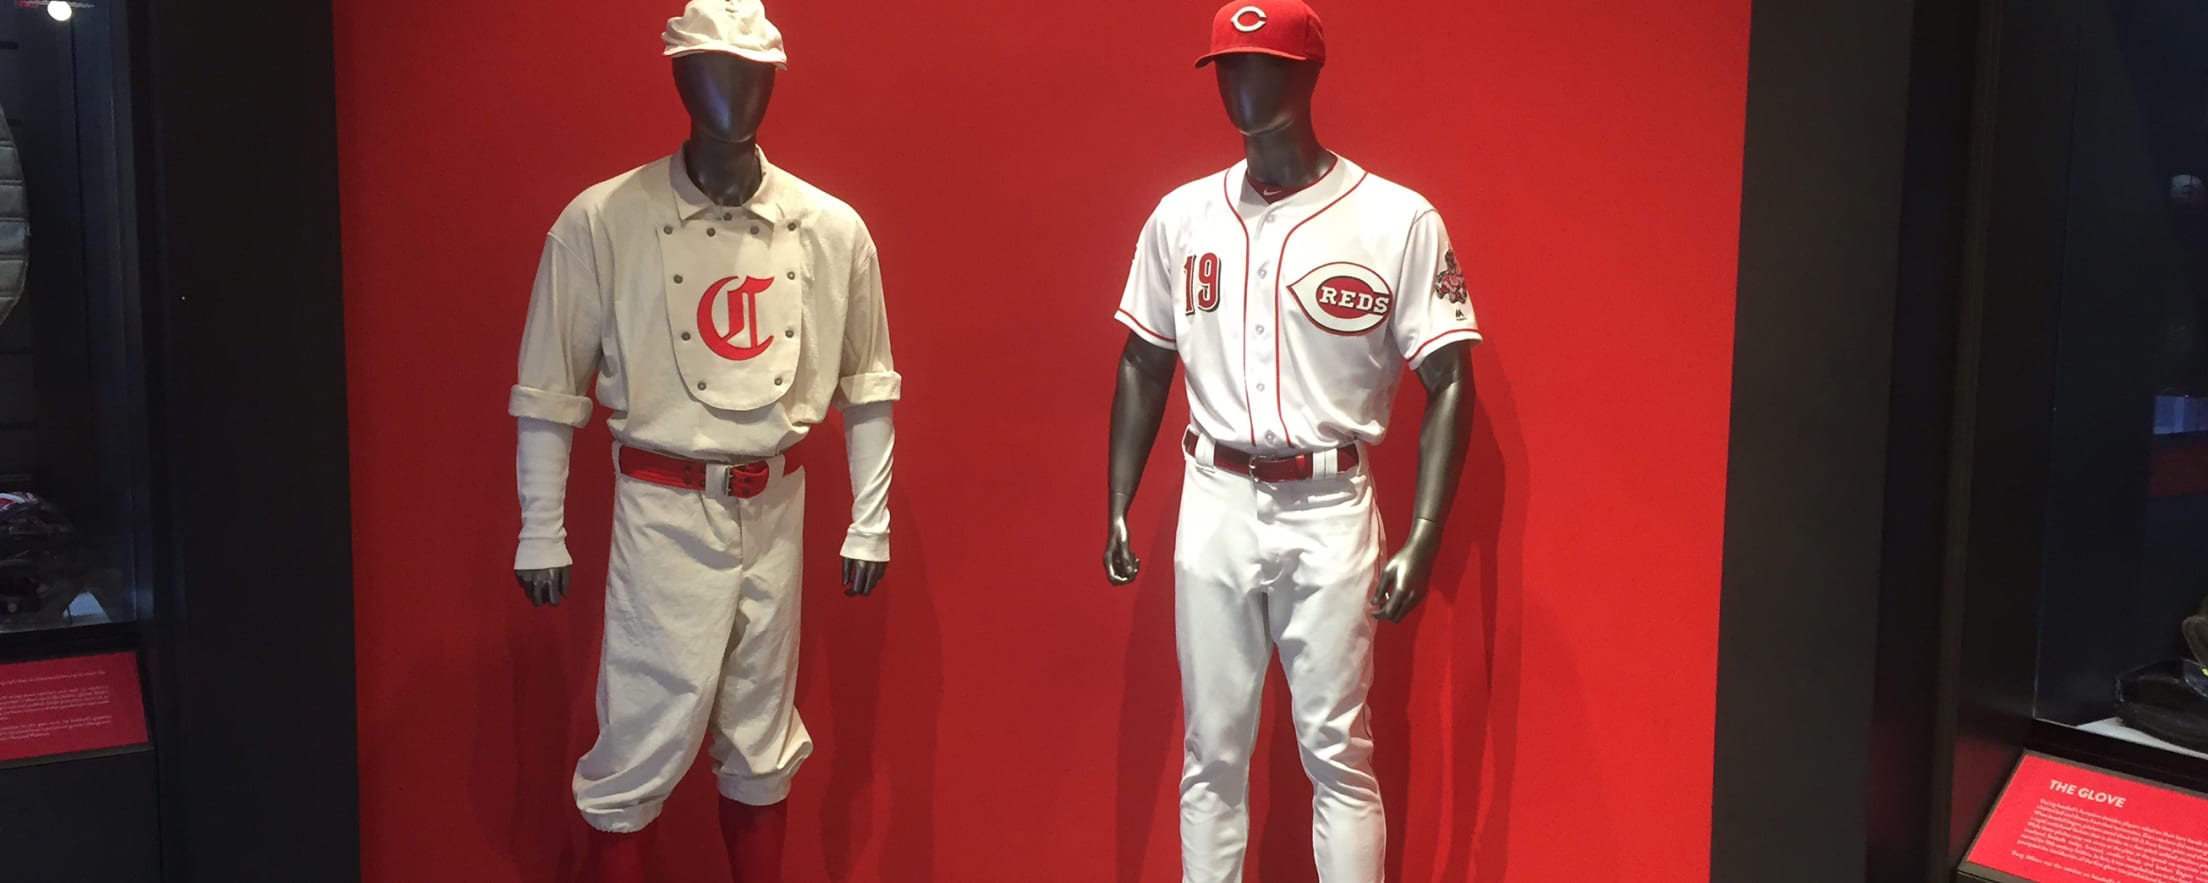 Touring the Cincinnati Reds Hall of Fame & Museum – Steven On The Move